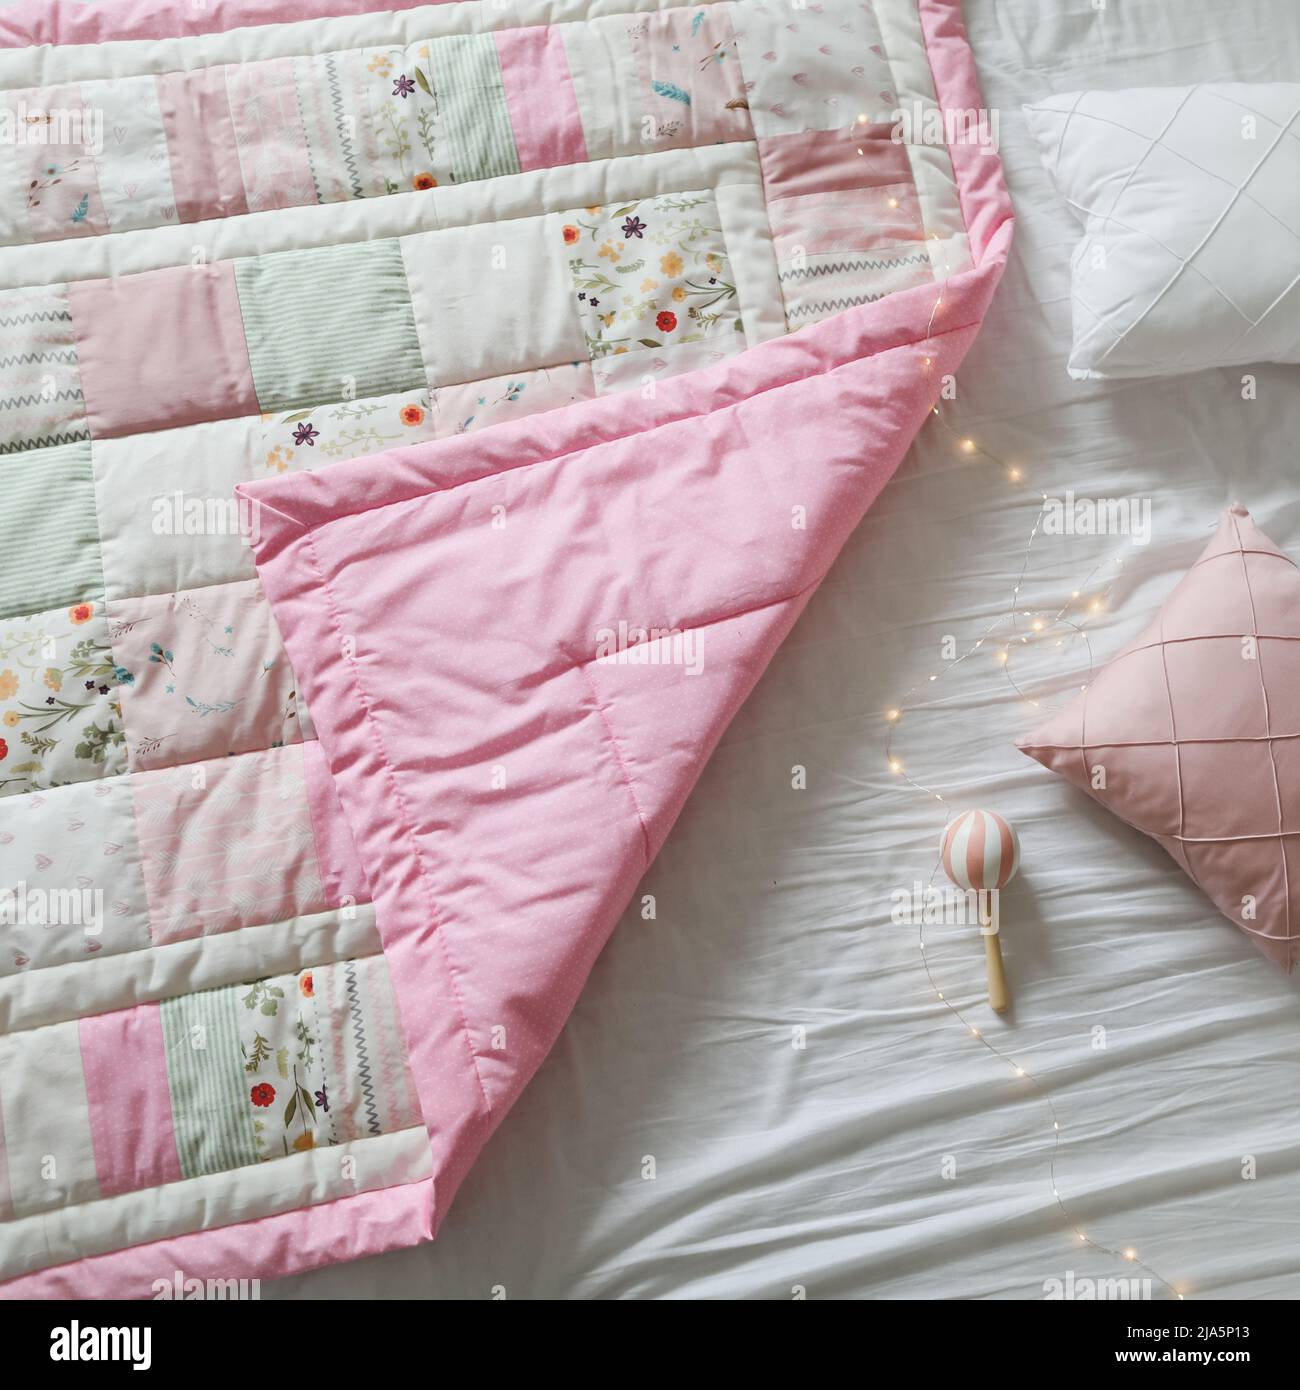 Cozy baby cot with a patchwork blanket. Baby bedding and textile for nursery Stock Photo